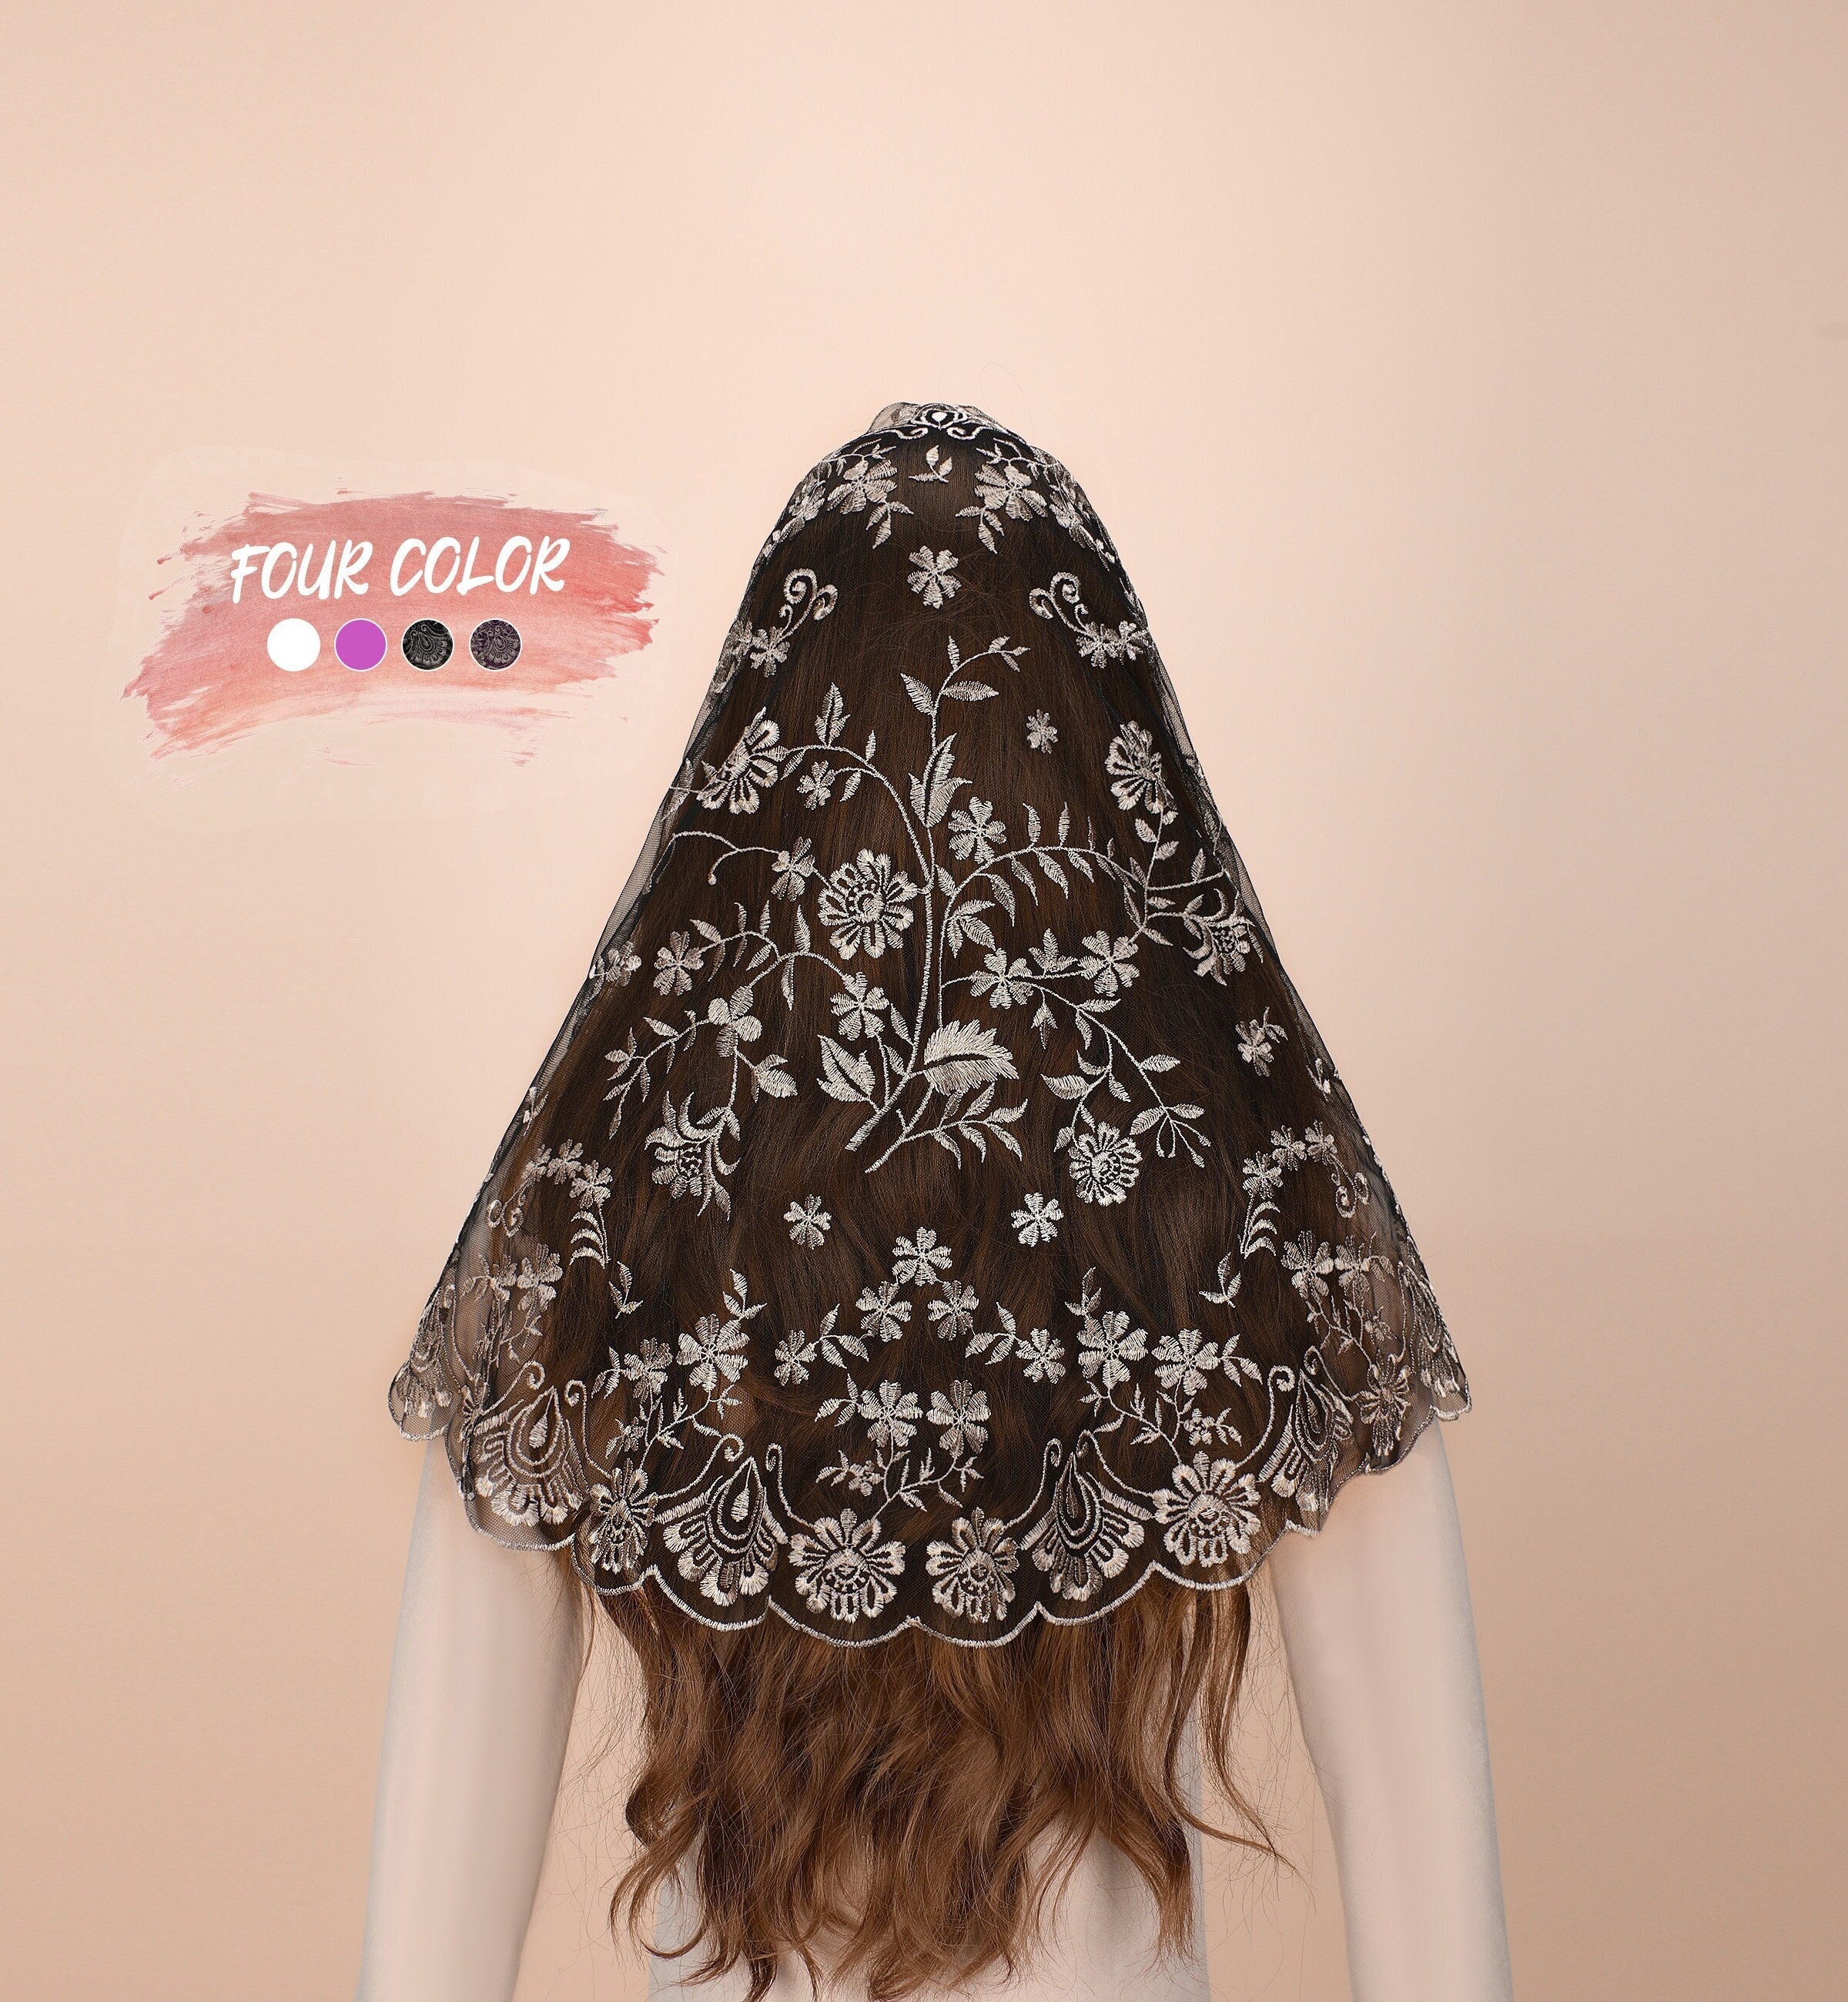 Mantveil Catholic Church Veils for Women: Traditional Lace Mantilla Chapel Veil Latin Mass Head Coverings with Clip